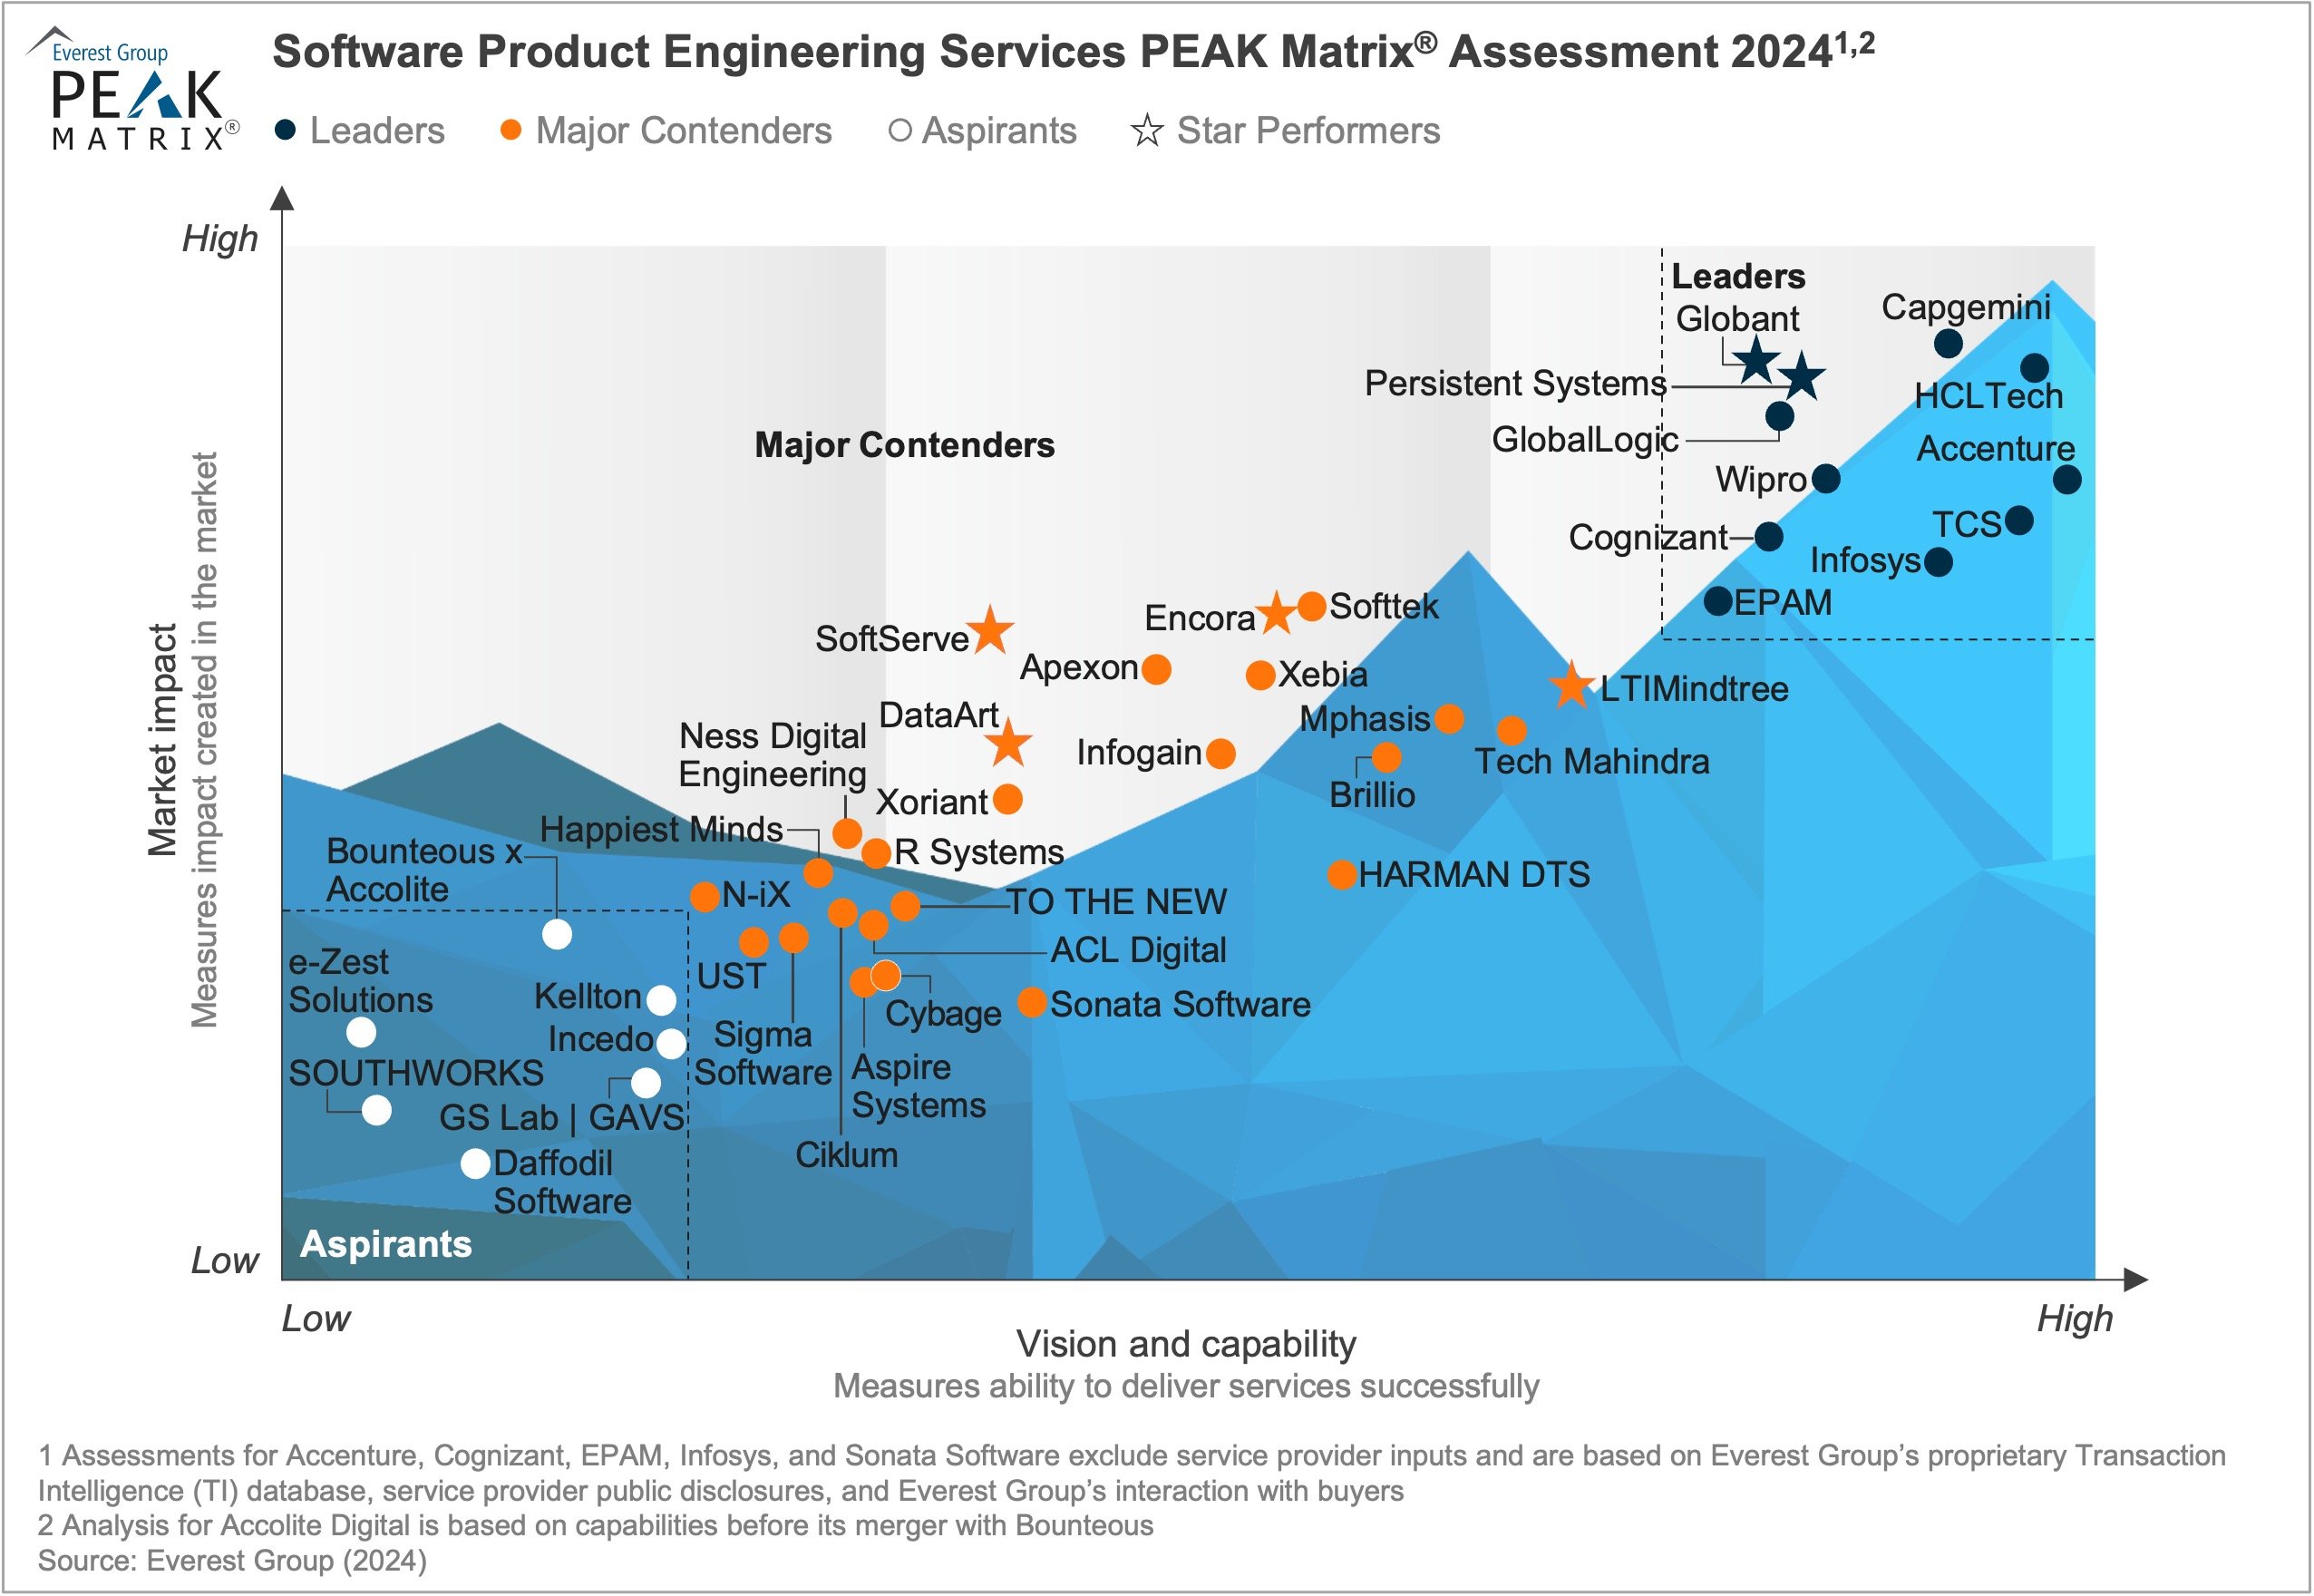 Software Product Engineering Services PEAK Matrix® Assessment 2024